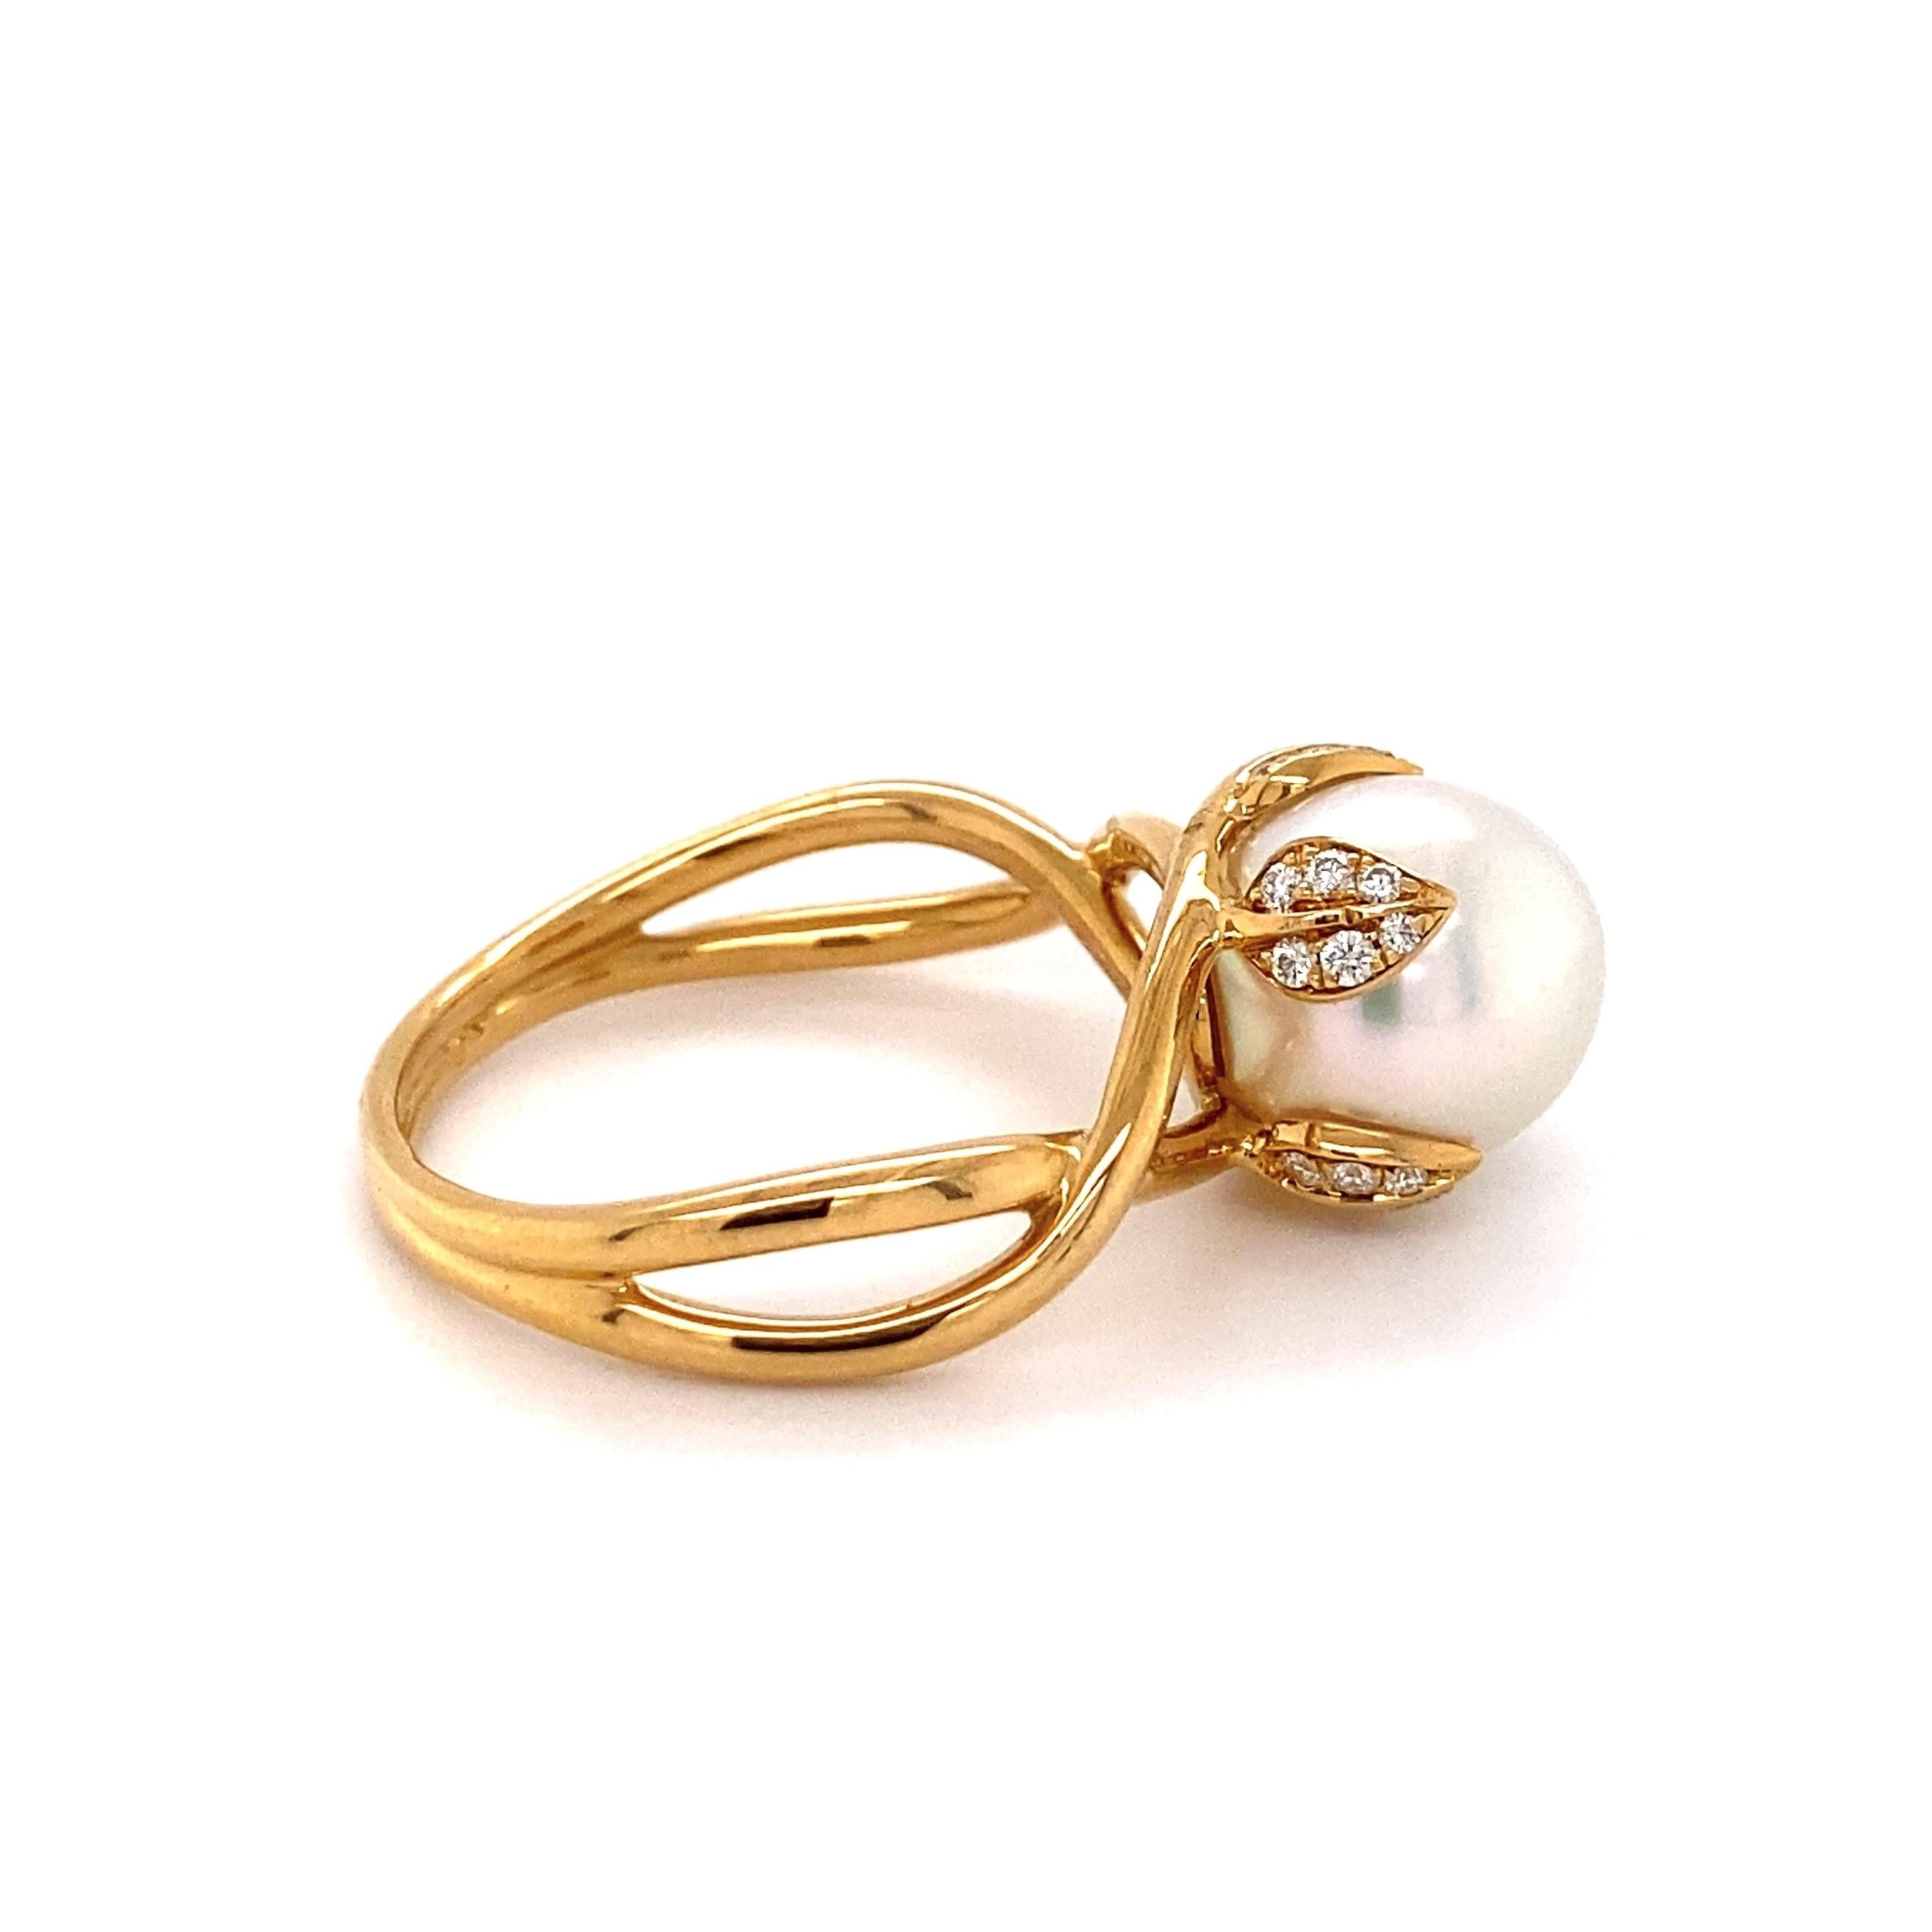 Simply Beautiful! 18K Yellow Gold Ring, centering an 11mm Pearl, accented by Diamonds, approx. 0.24tcw. Shank marked: Tiffany & Co 750 France. Approx. dimensions: 1.35”l x 0.98”w x 0.46”h. Ring size: 11.25, we offer ring resizing. Chic, Classic and